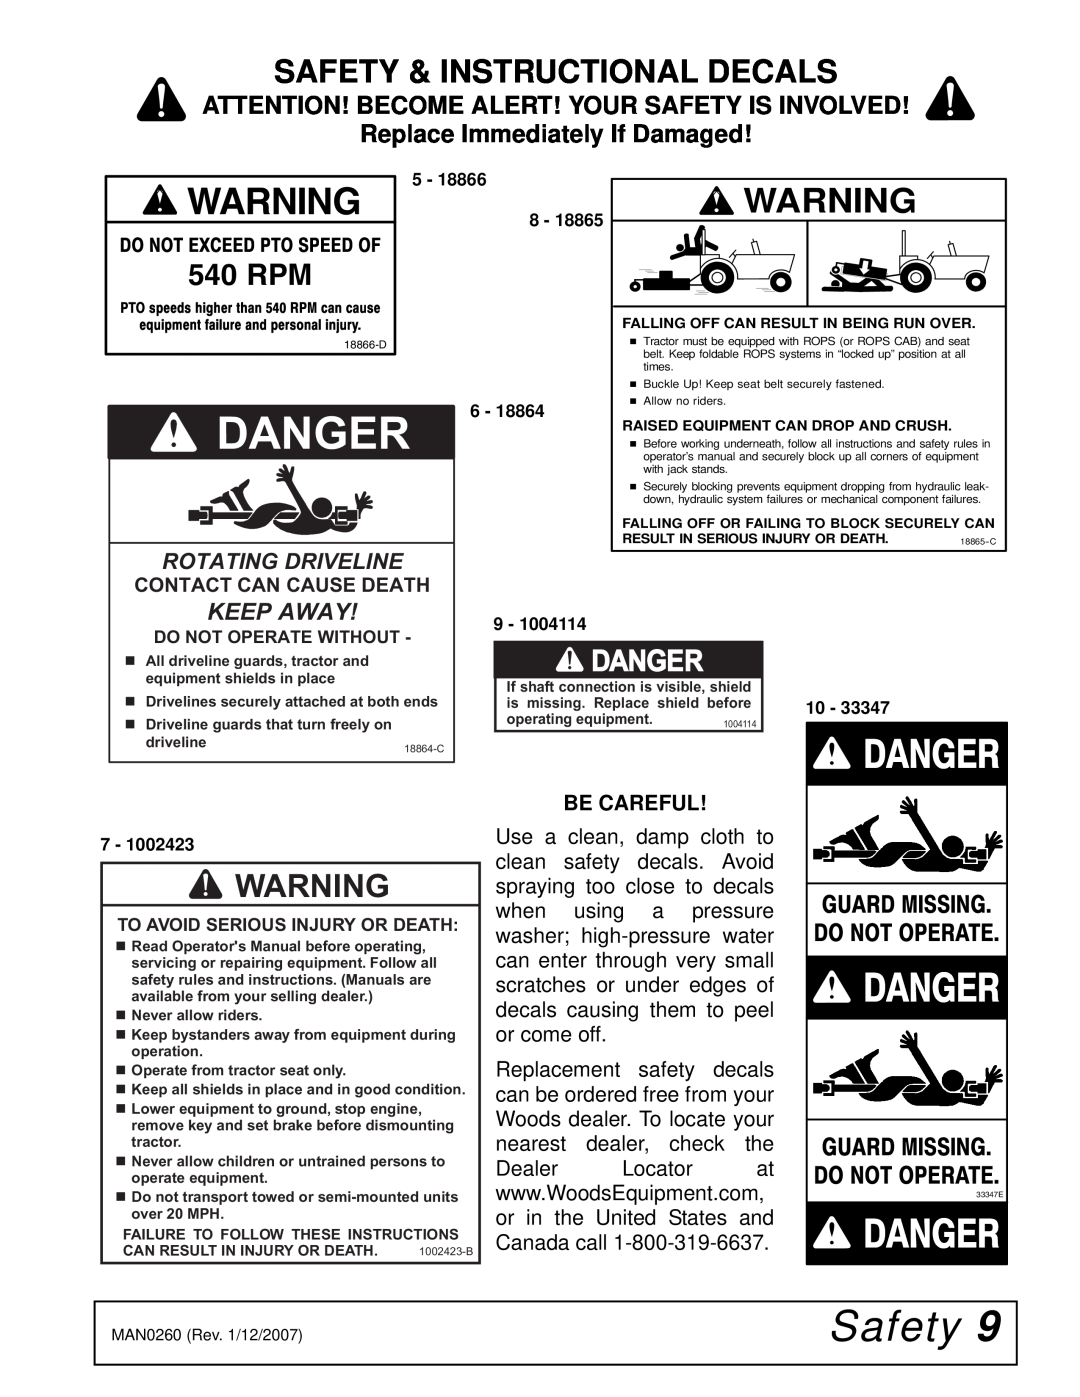 Woods Equipment RDC54, RD72 Be Careful, Danger, Safety & Instructional Decals, 33347E, Replace Immediately If Damaged 